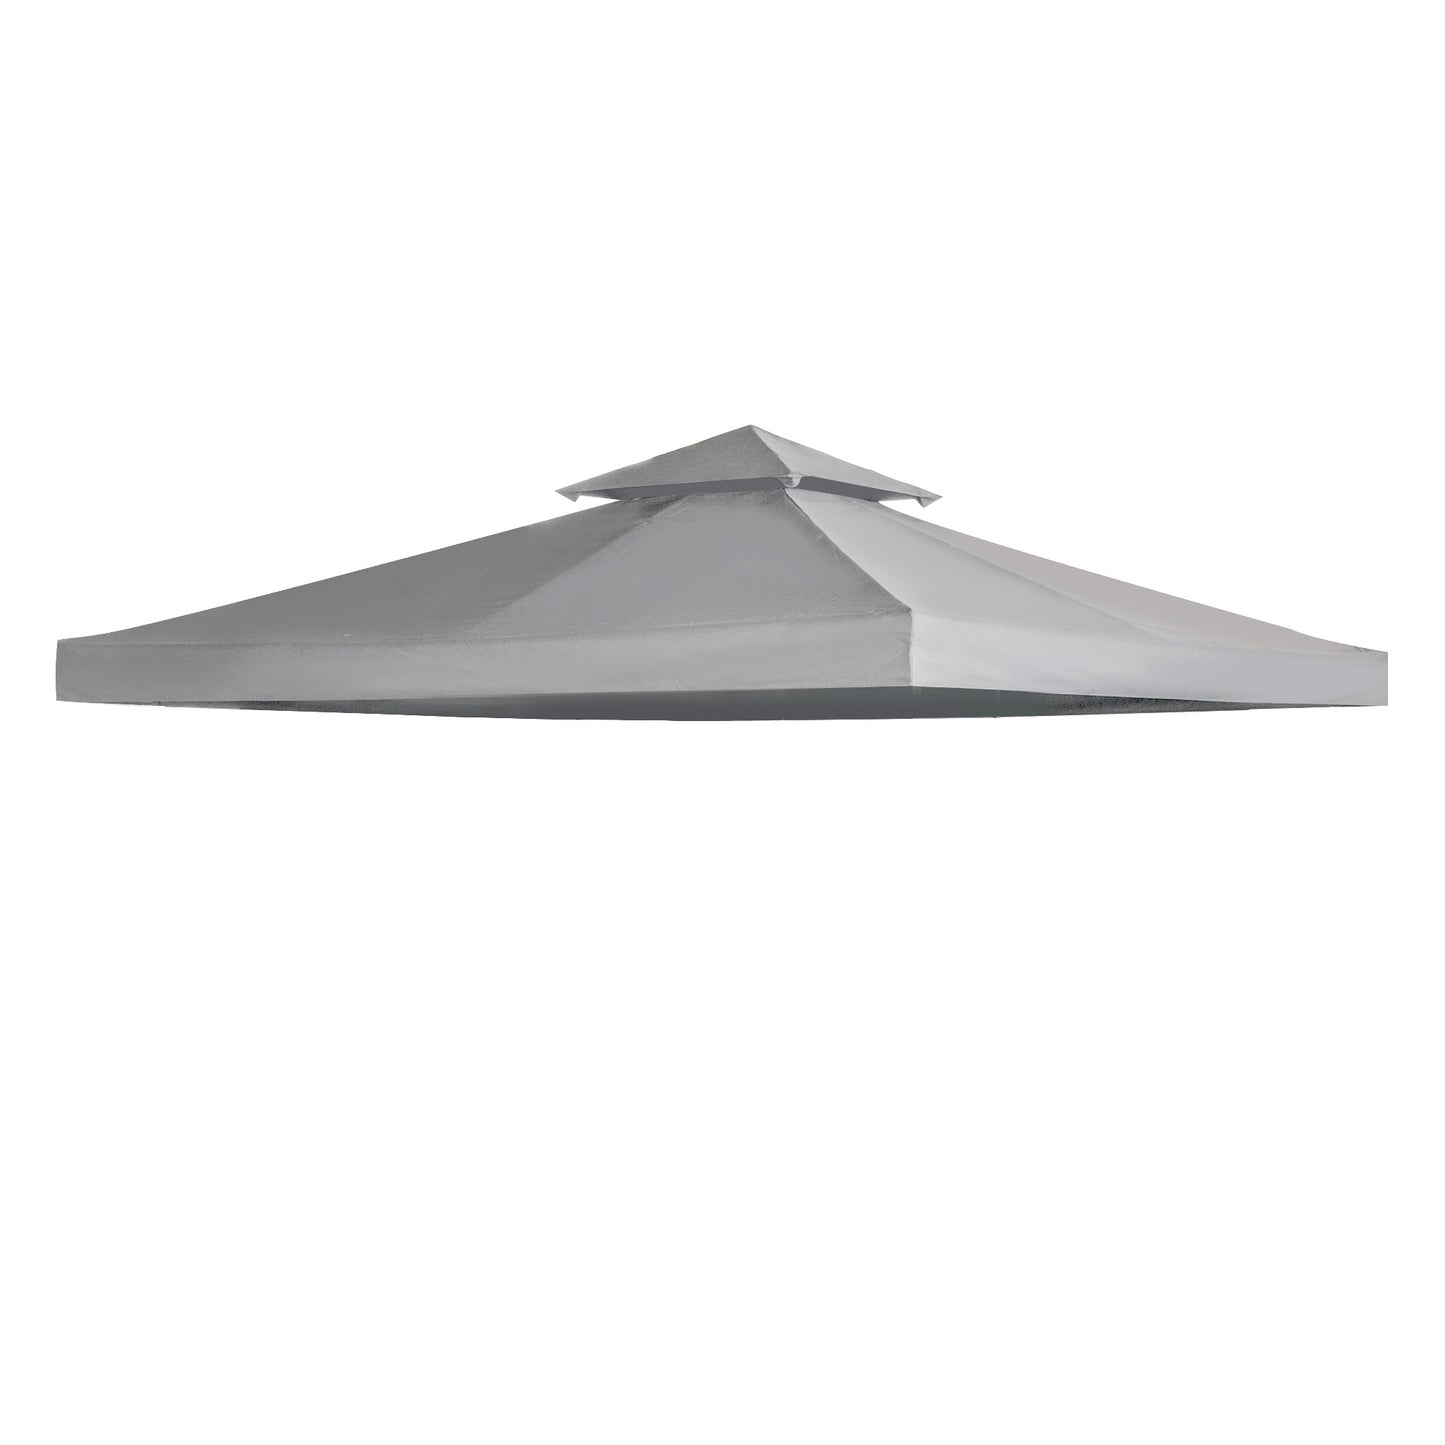 Outsunny 3(m) Gazebo Top Cover Double Tier Canopy Replacement Pavilion Roof Light Grey